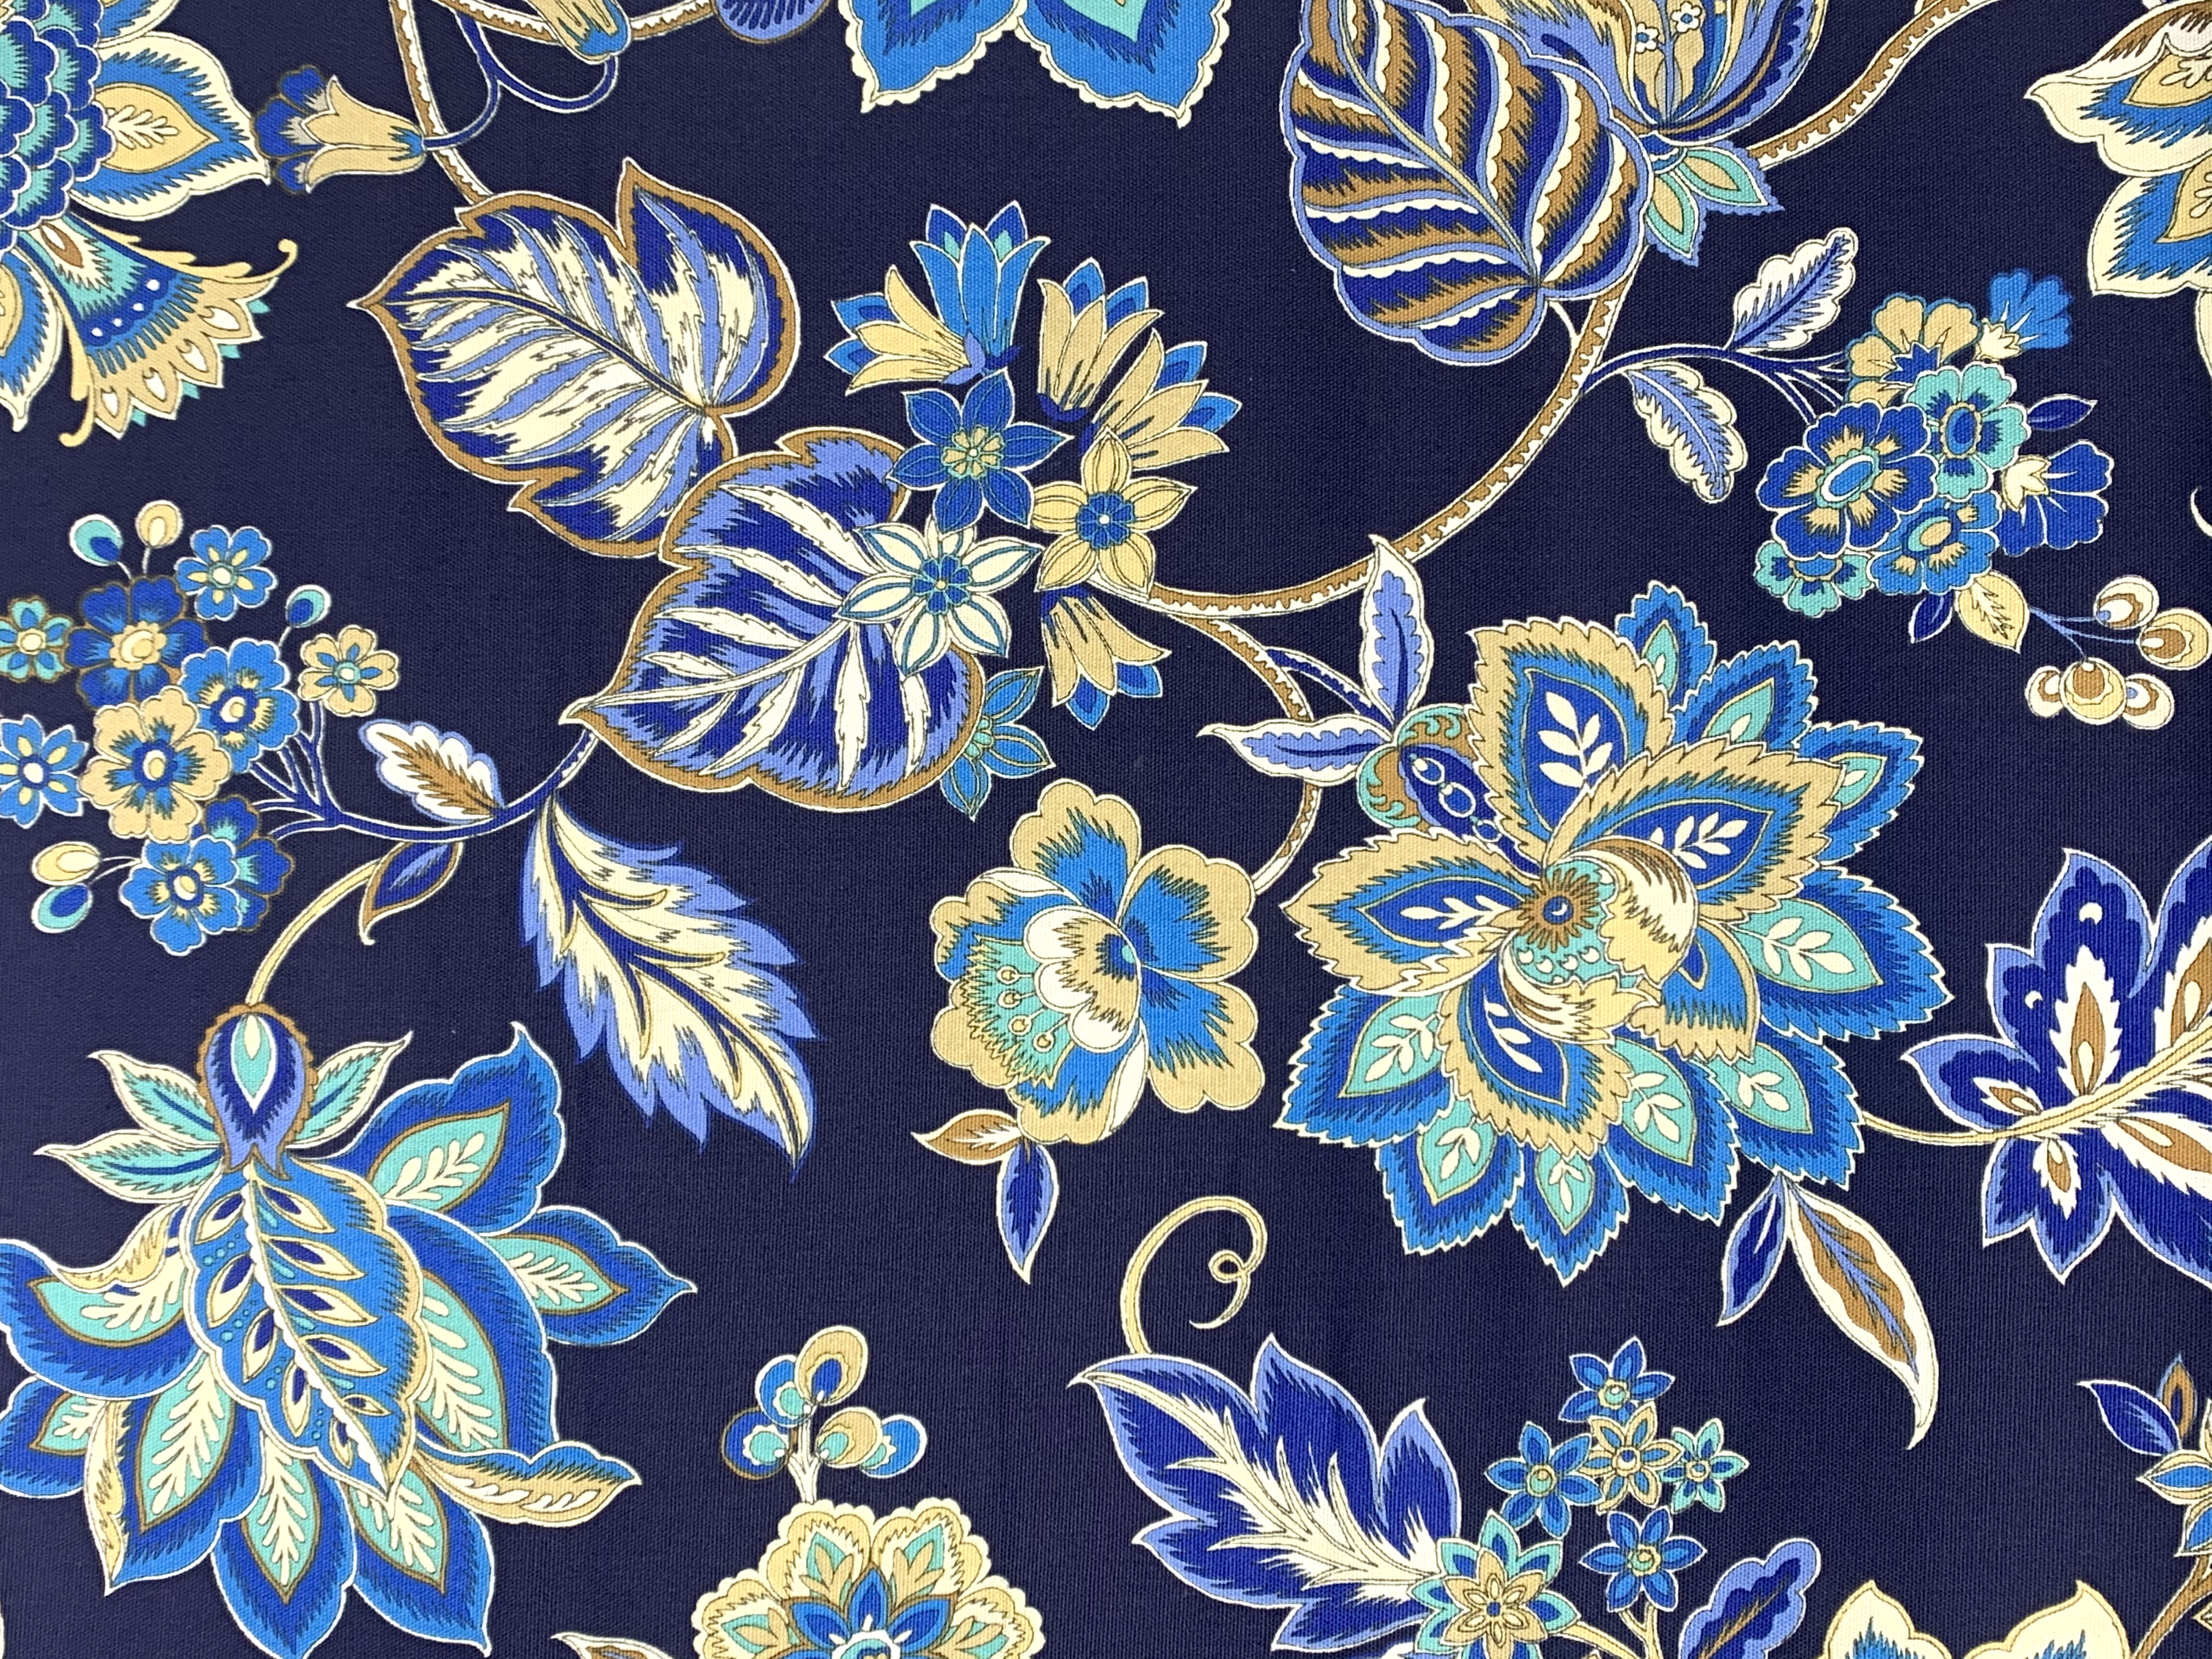 Waverly Inspirations 45" 100% Cotton Printed Sewing & Craft Fabric By the Yard, Floral Blue - image 2 of 3